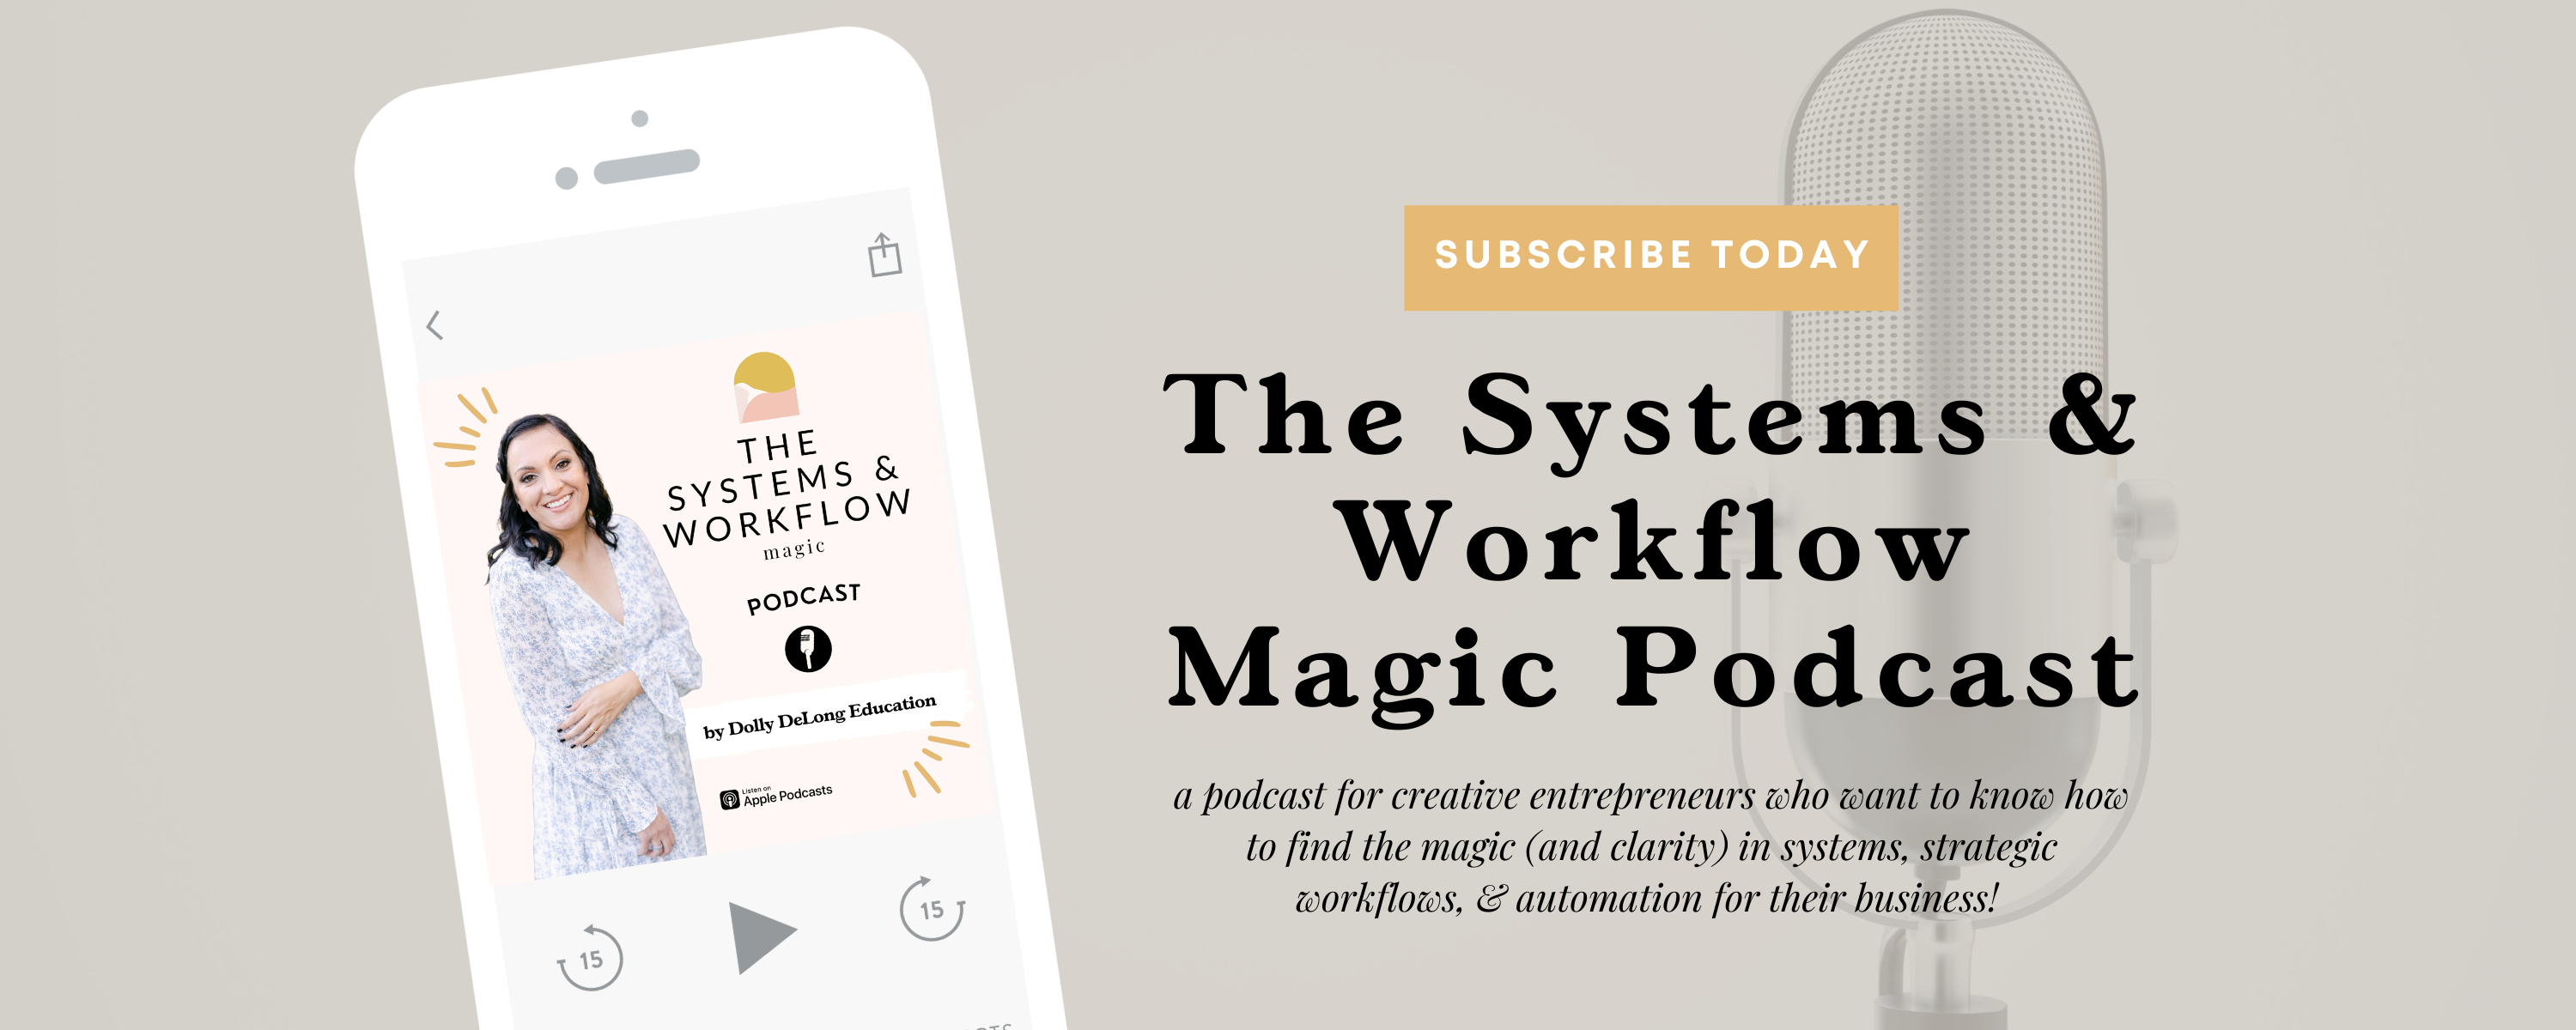 The Systems and Workflow Magic podcast is live